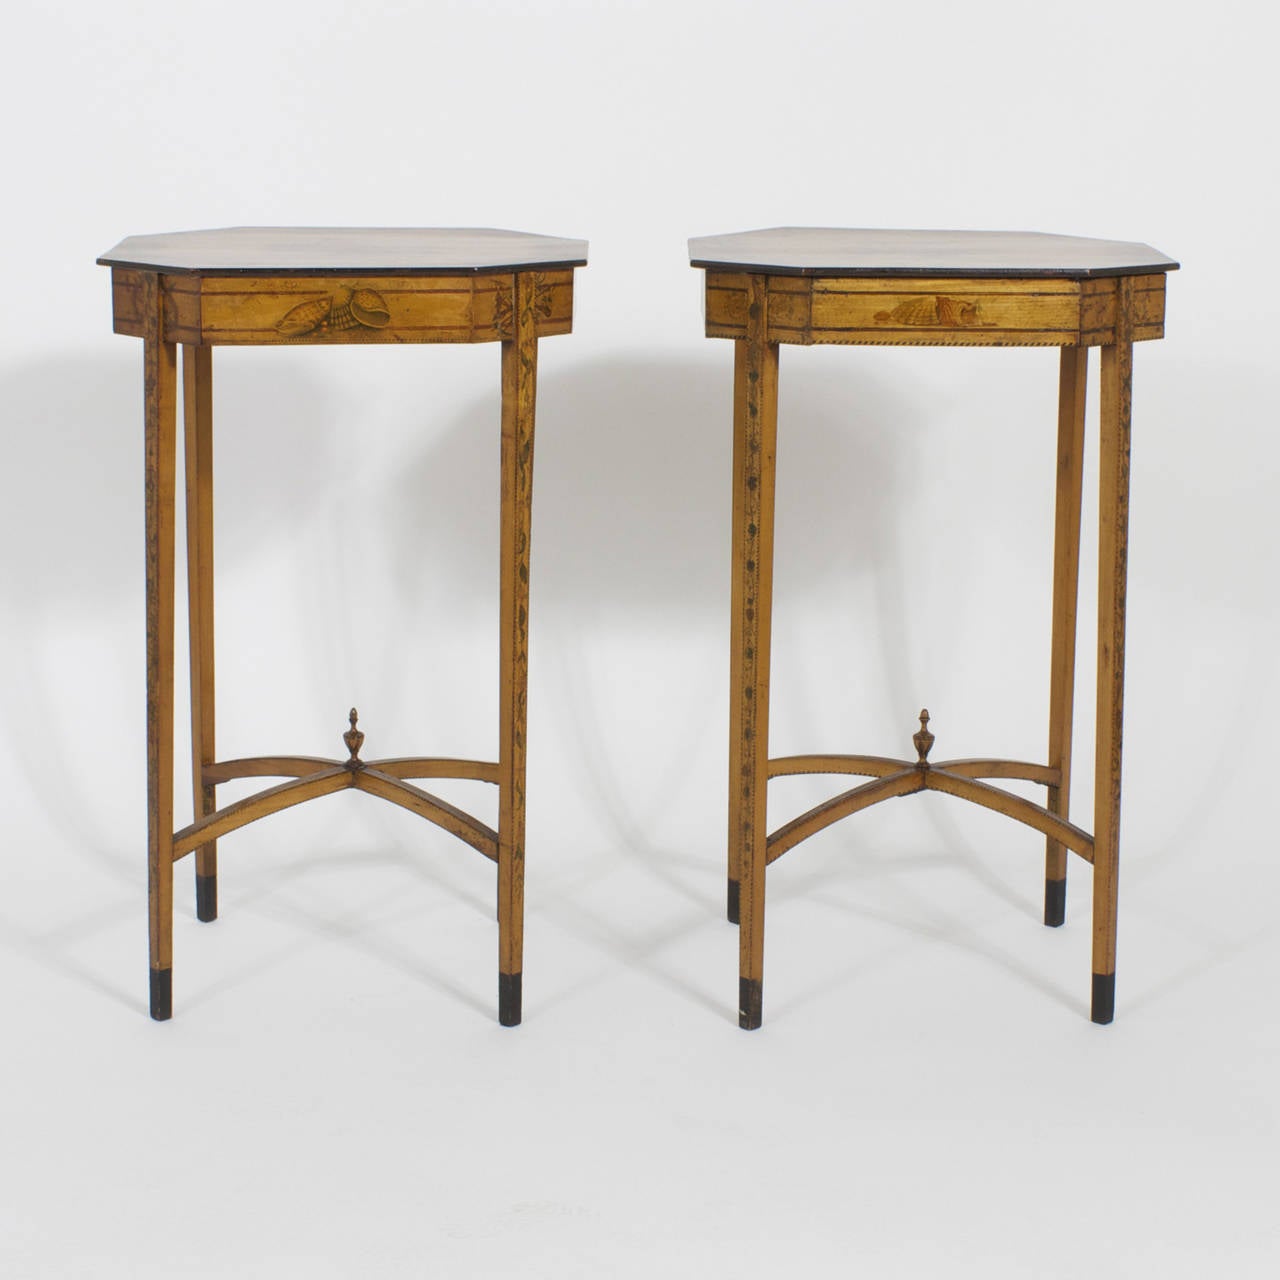 Elegant pair of satinwood tables or stands with hand-painted flowers and leaves on a semi hexagonal top. These tables feature sides decorated with nautical inspired seashell paintings between darker wood banding and a striped inlaid edge. Complete